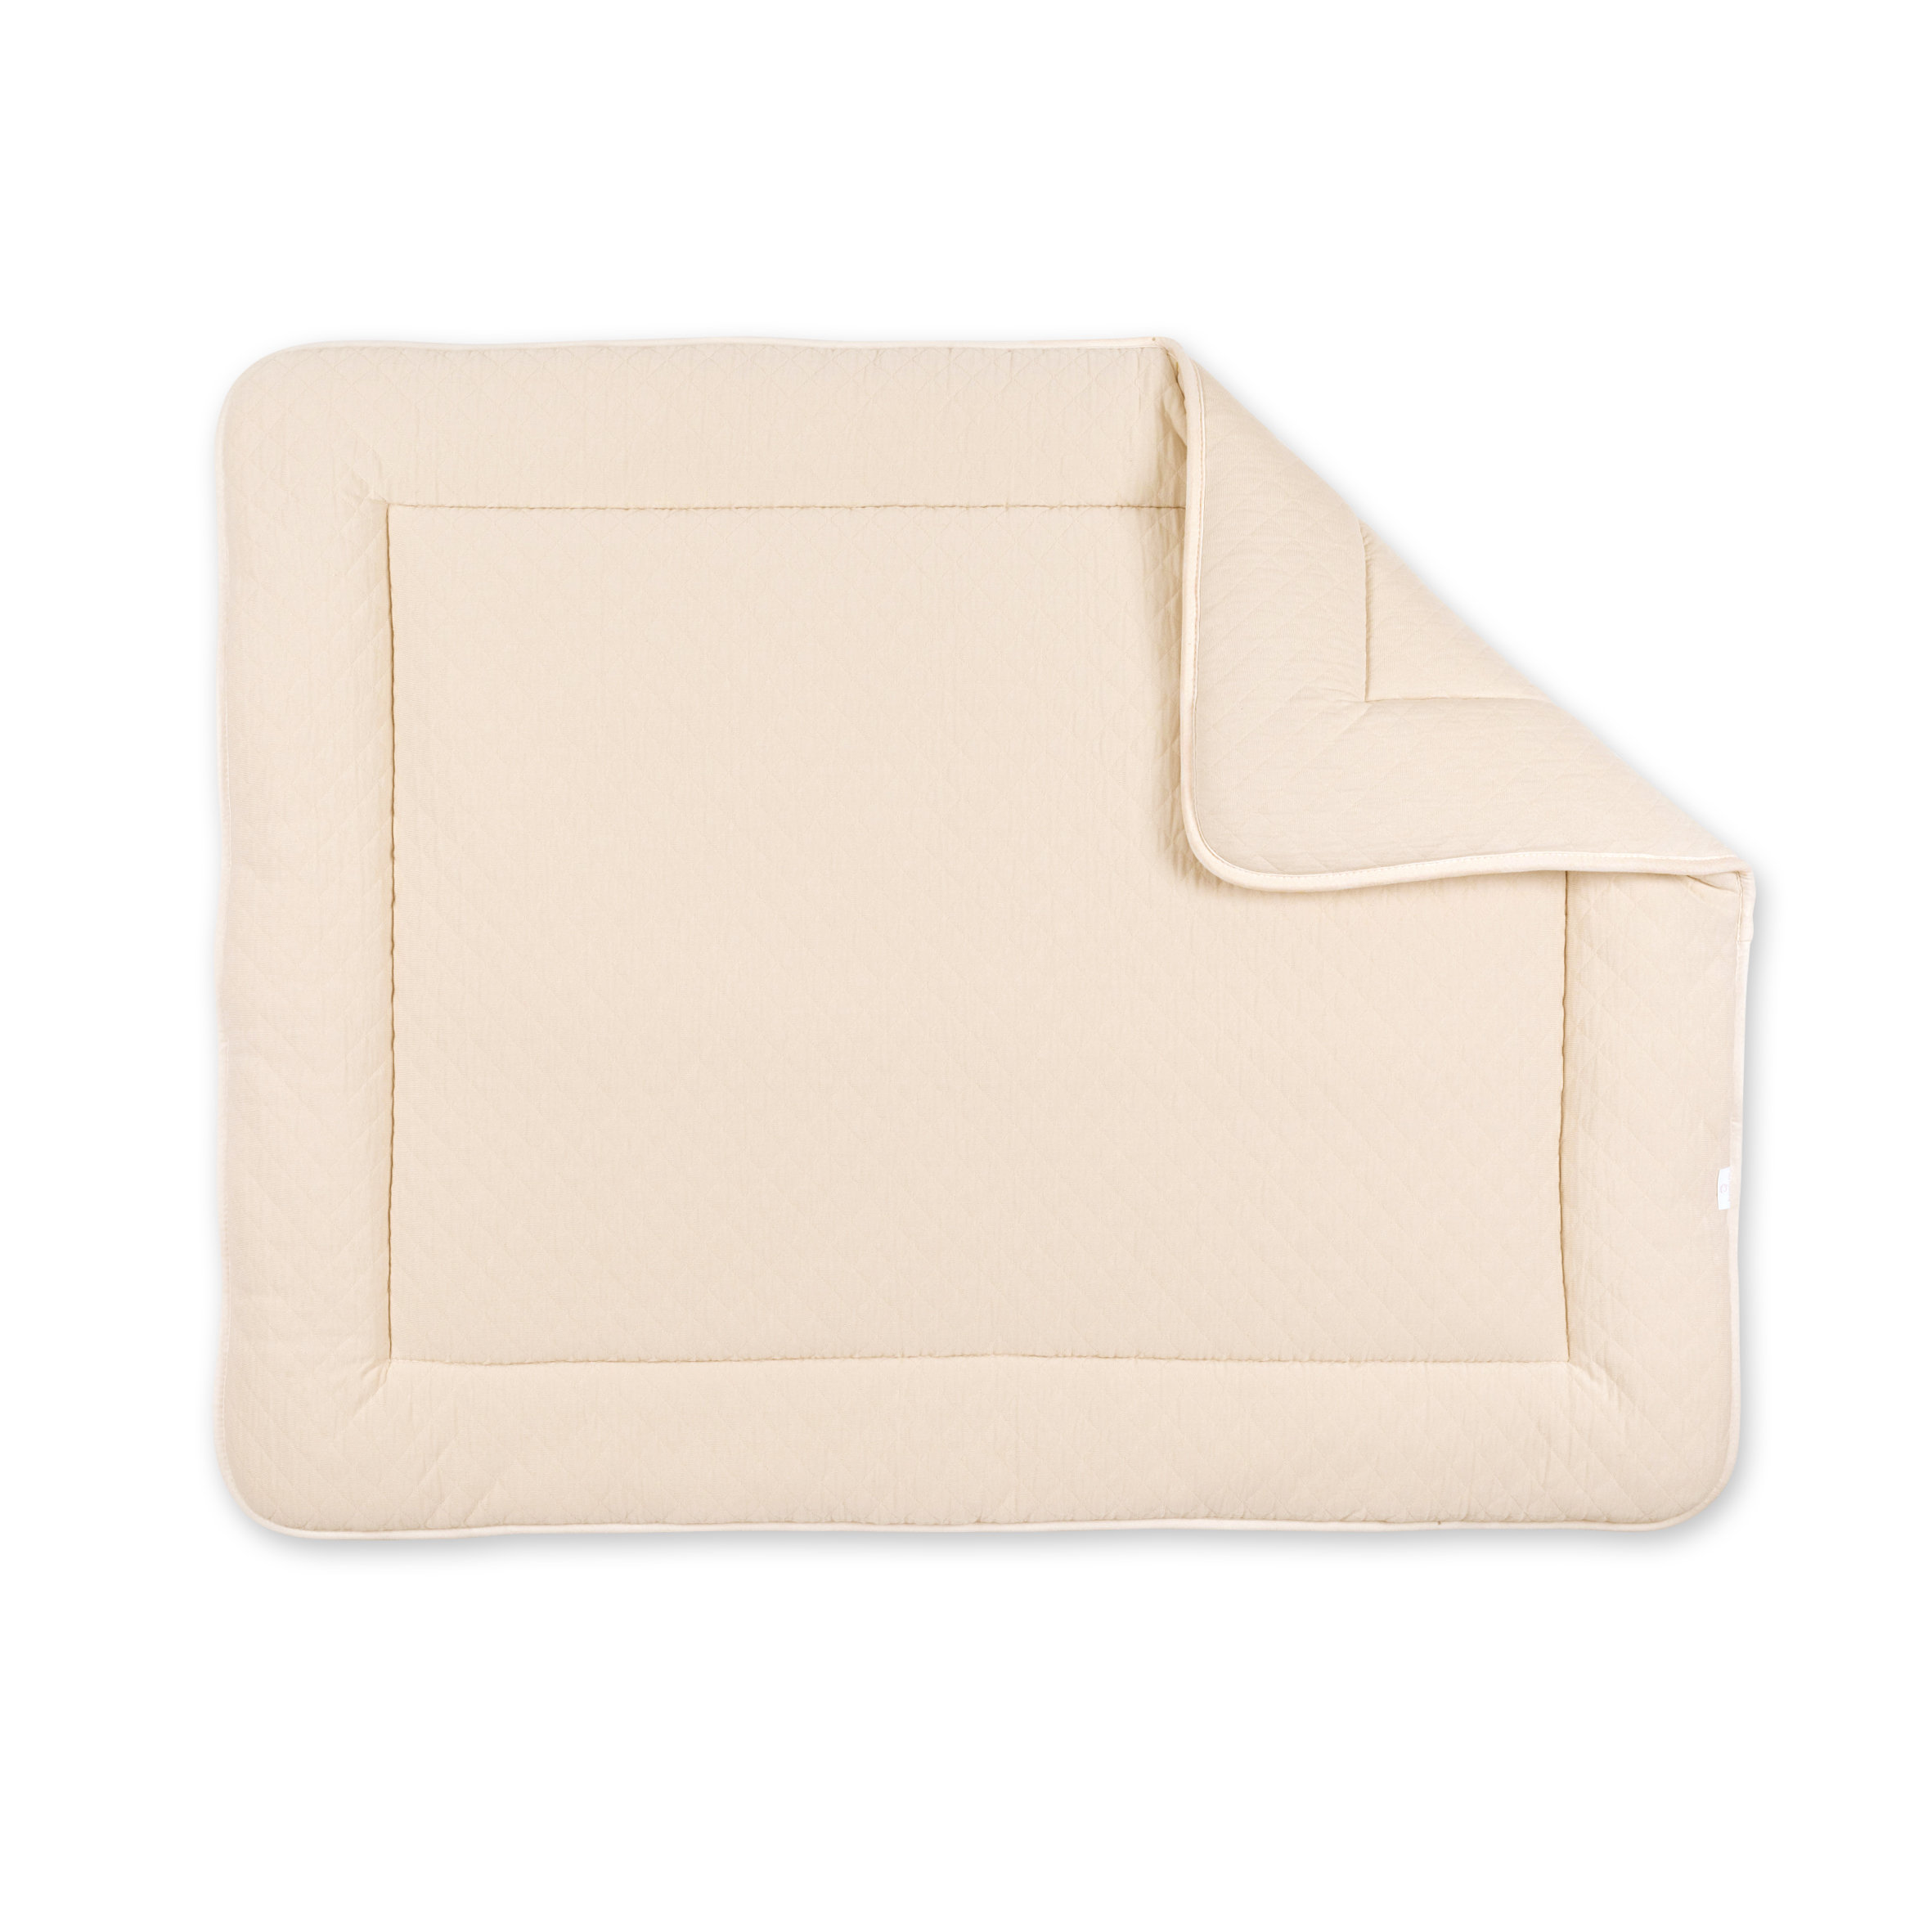 Padded play mat Pady quilted 75x95cm QUILT Cream